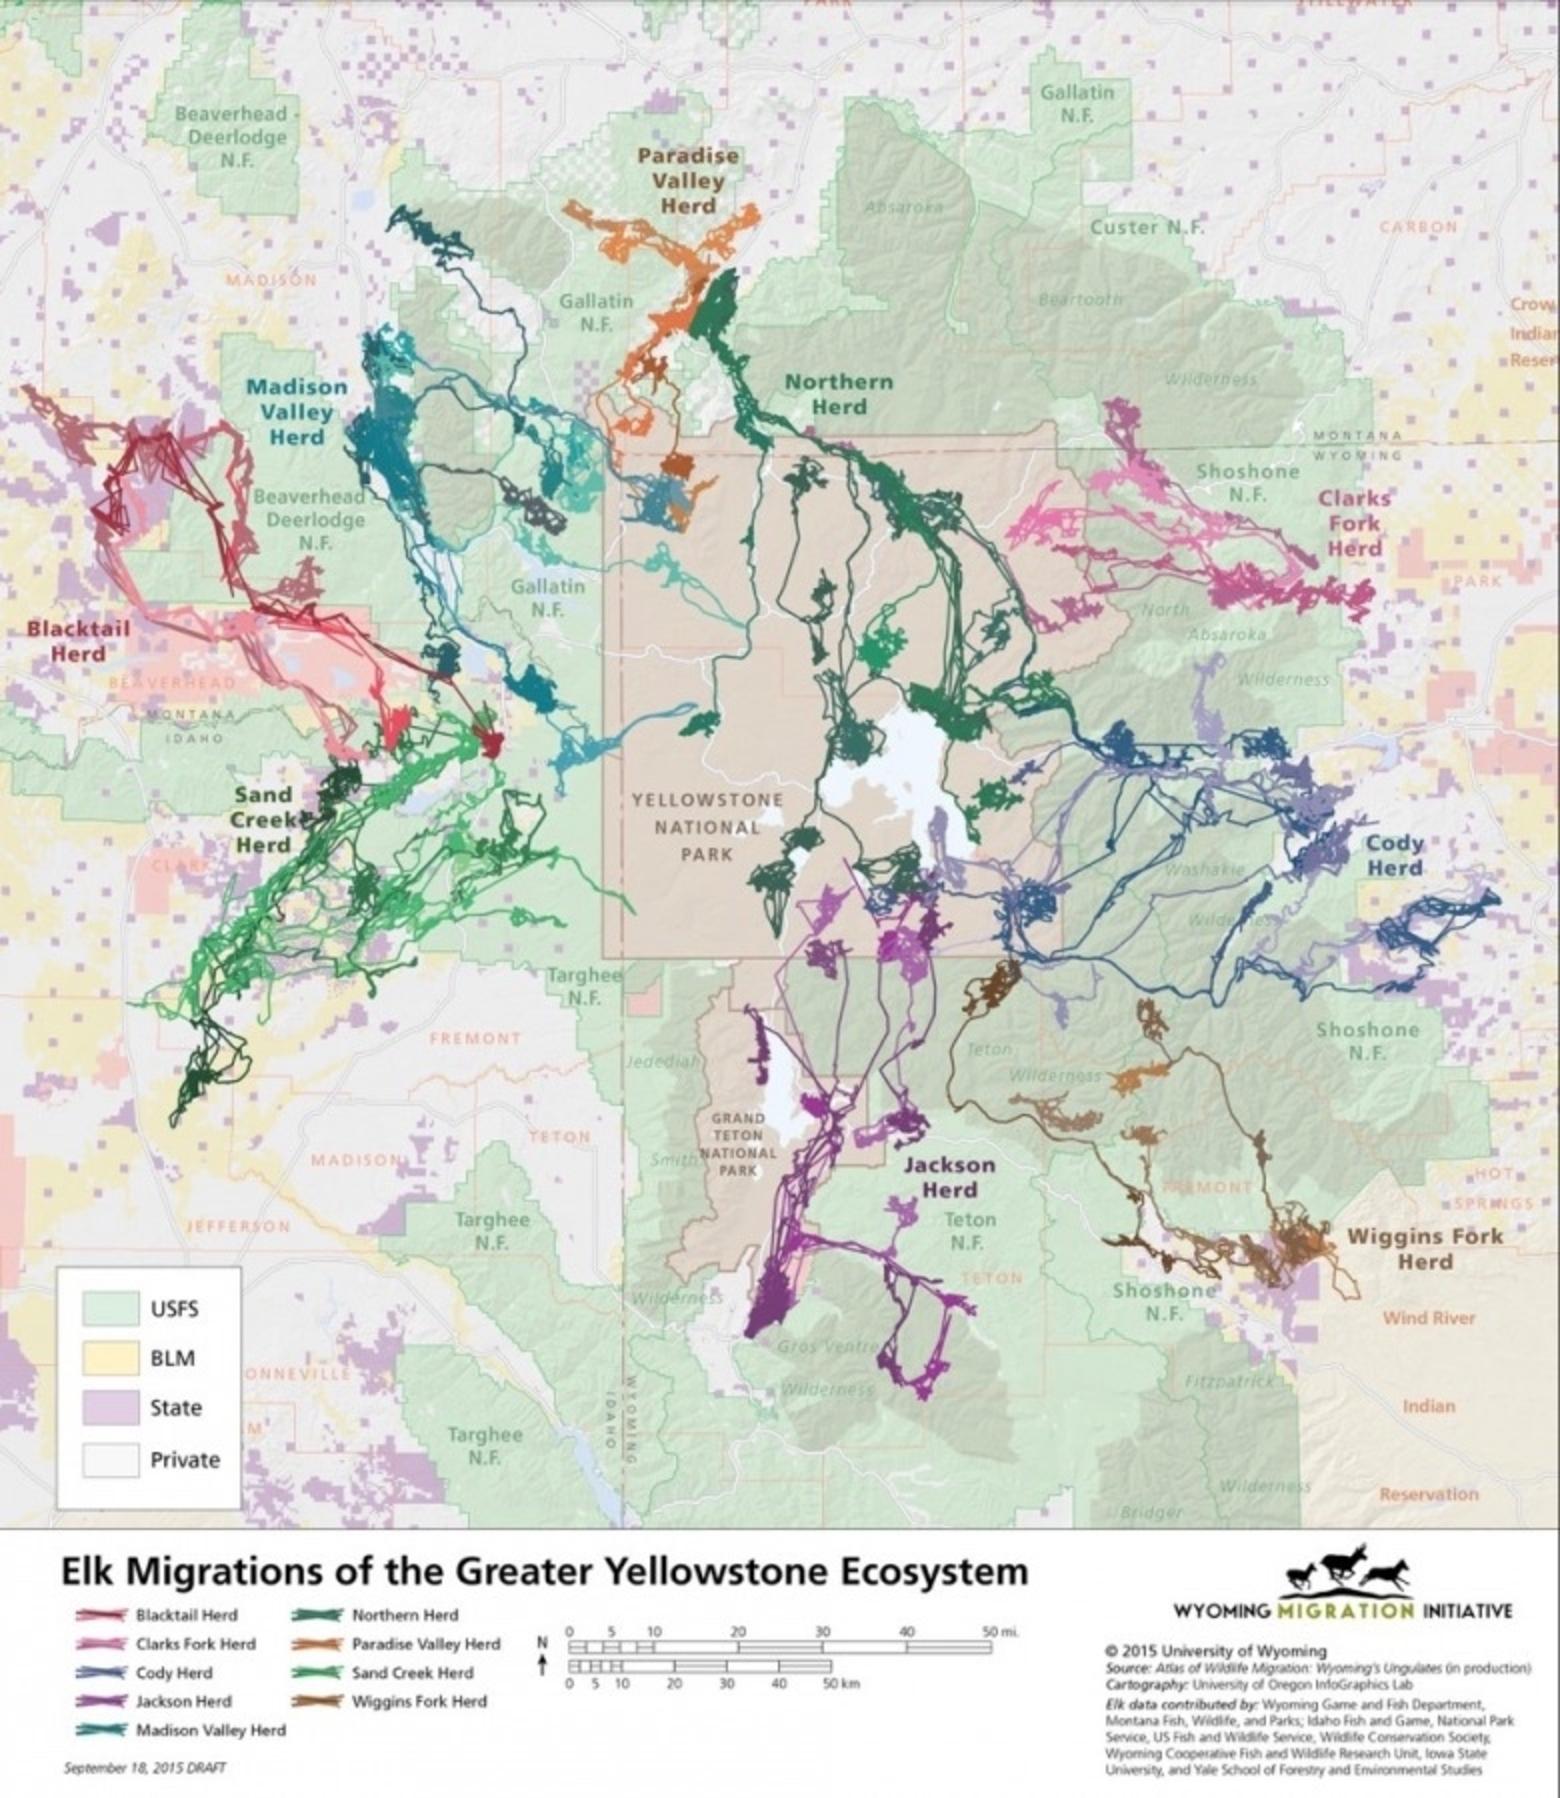 Map of elk migration routes in the Greater Yellowstone Ecosystem assembled by the Wyoming Migration Initiative.